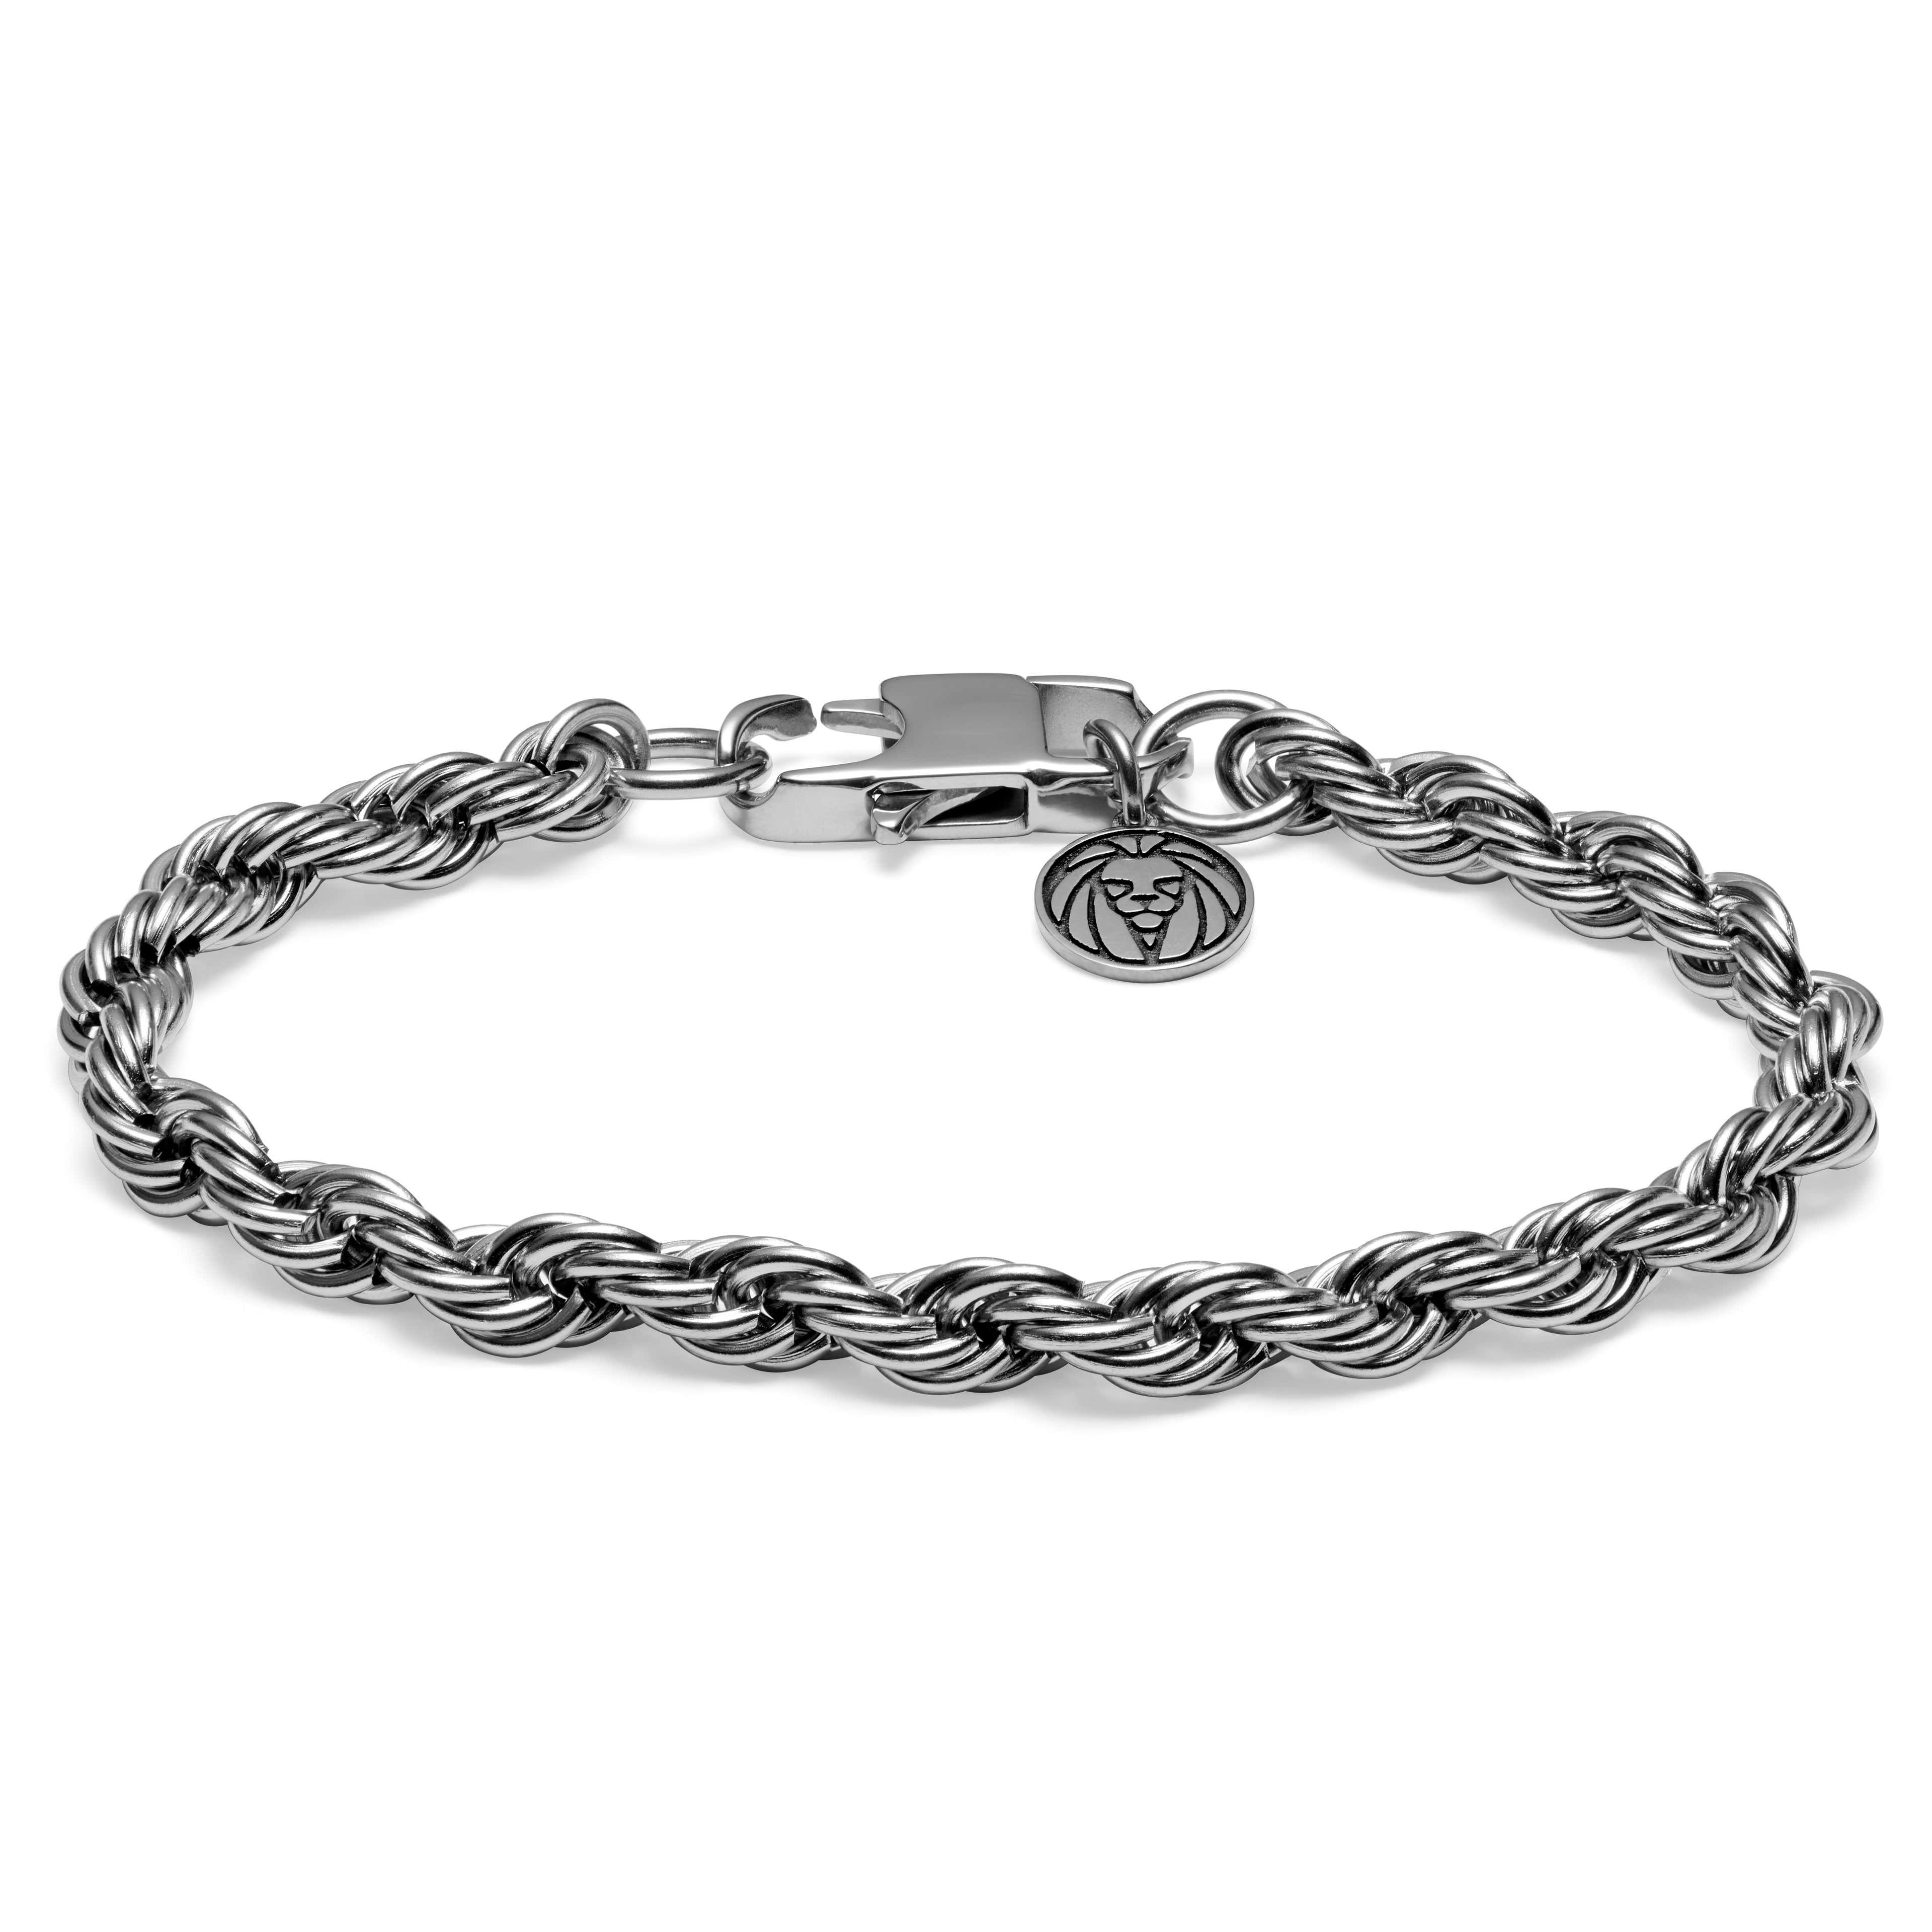 Corwin Amager Silver-Tone 6mm Rope Chain Bracelet